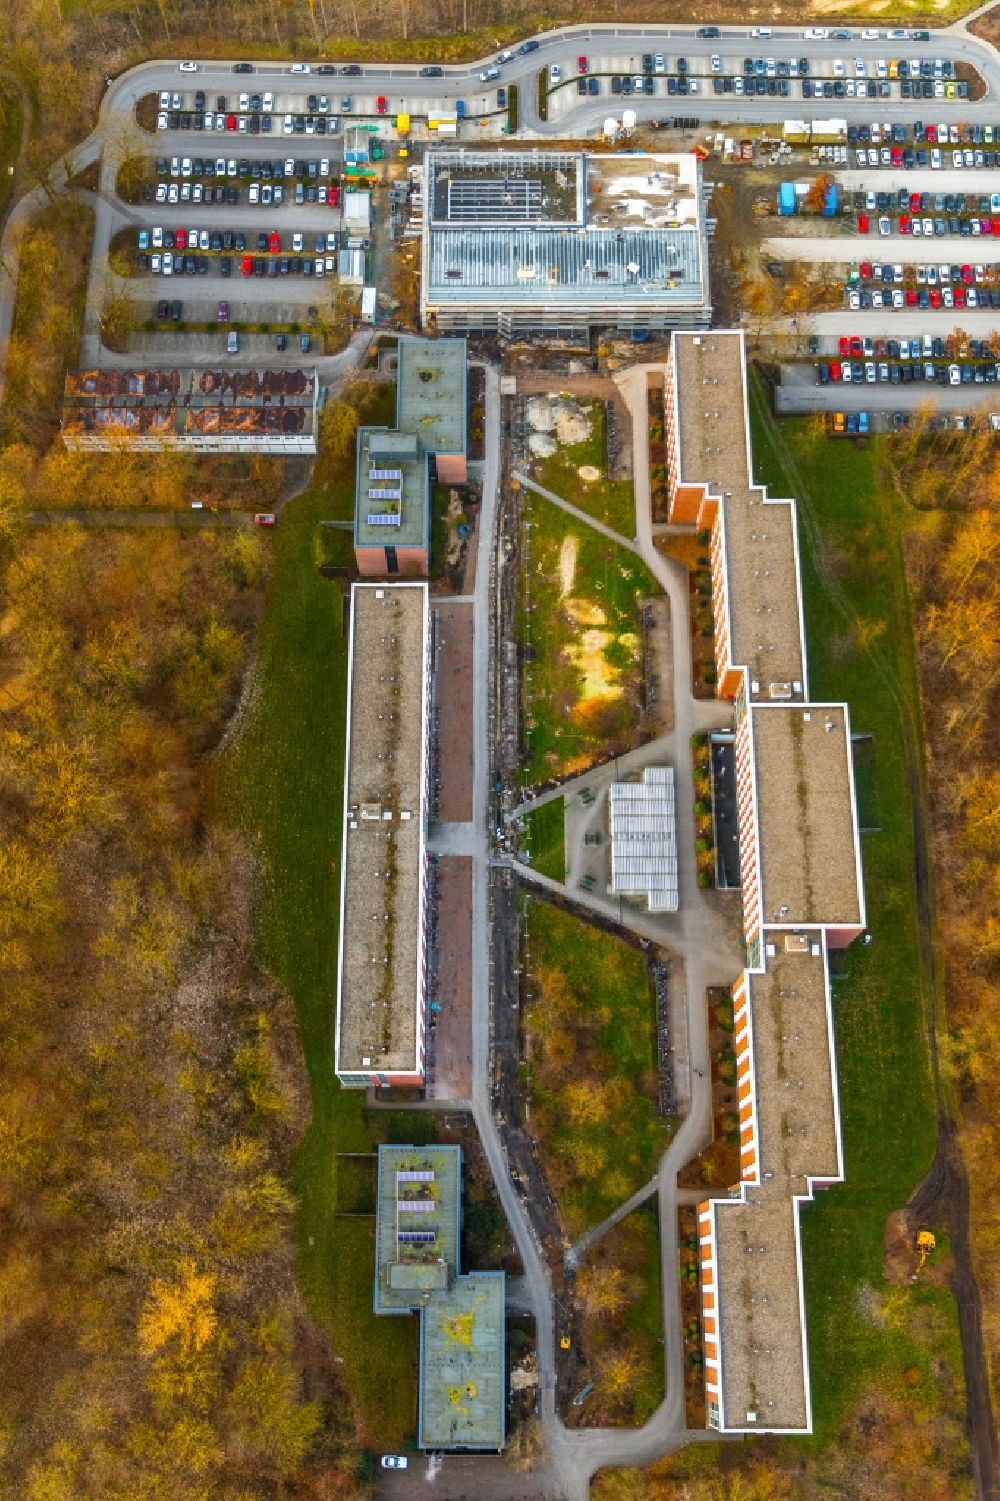 Nordkirchen from above - Mensa - Aula- building on the campus of the University of Fachhochschule fuer Finanzen FHF in Nordkirchen in the state North Rhine-Westphalia, Germany